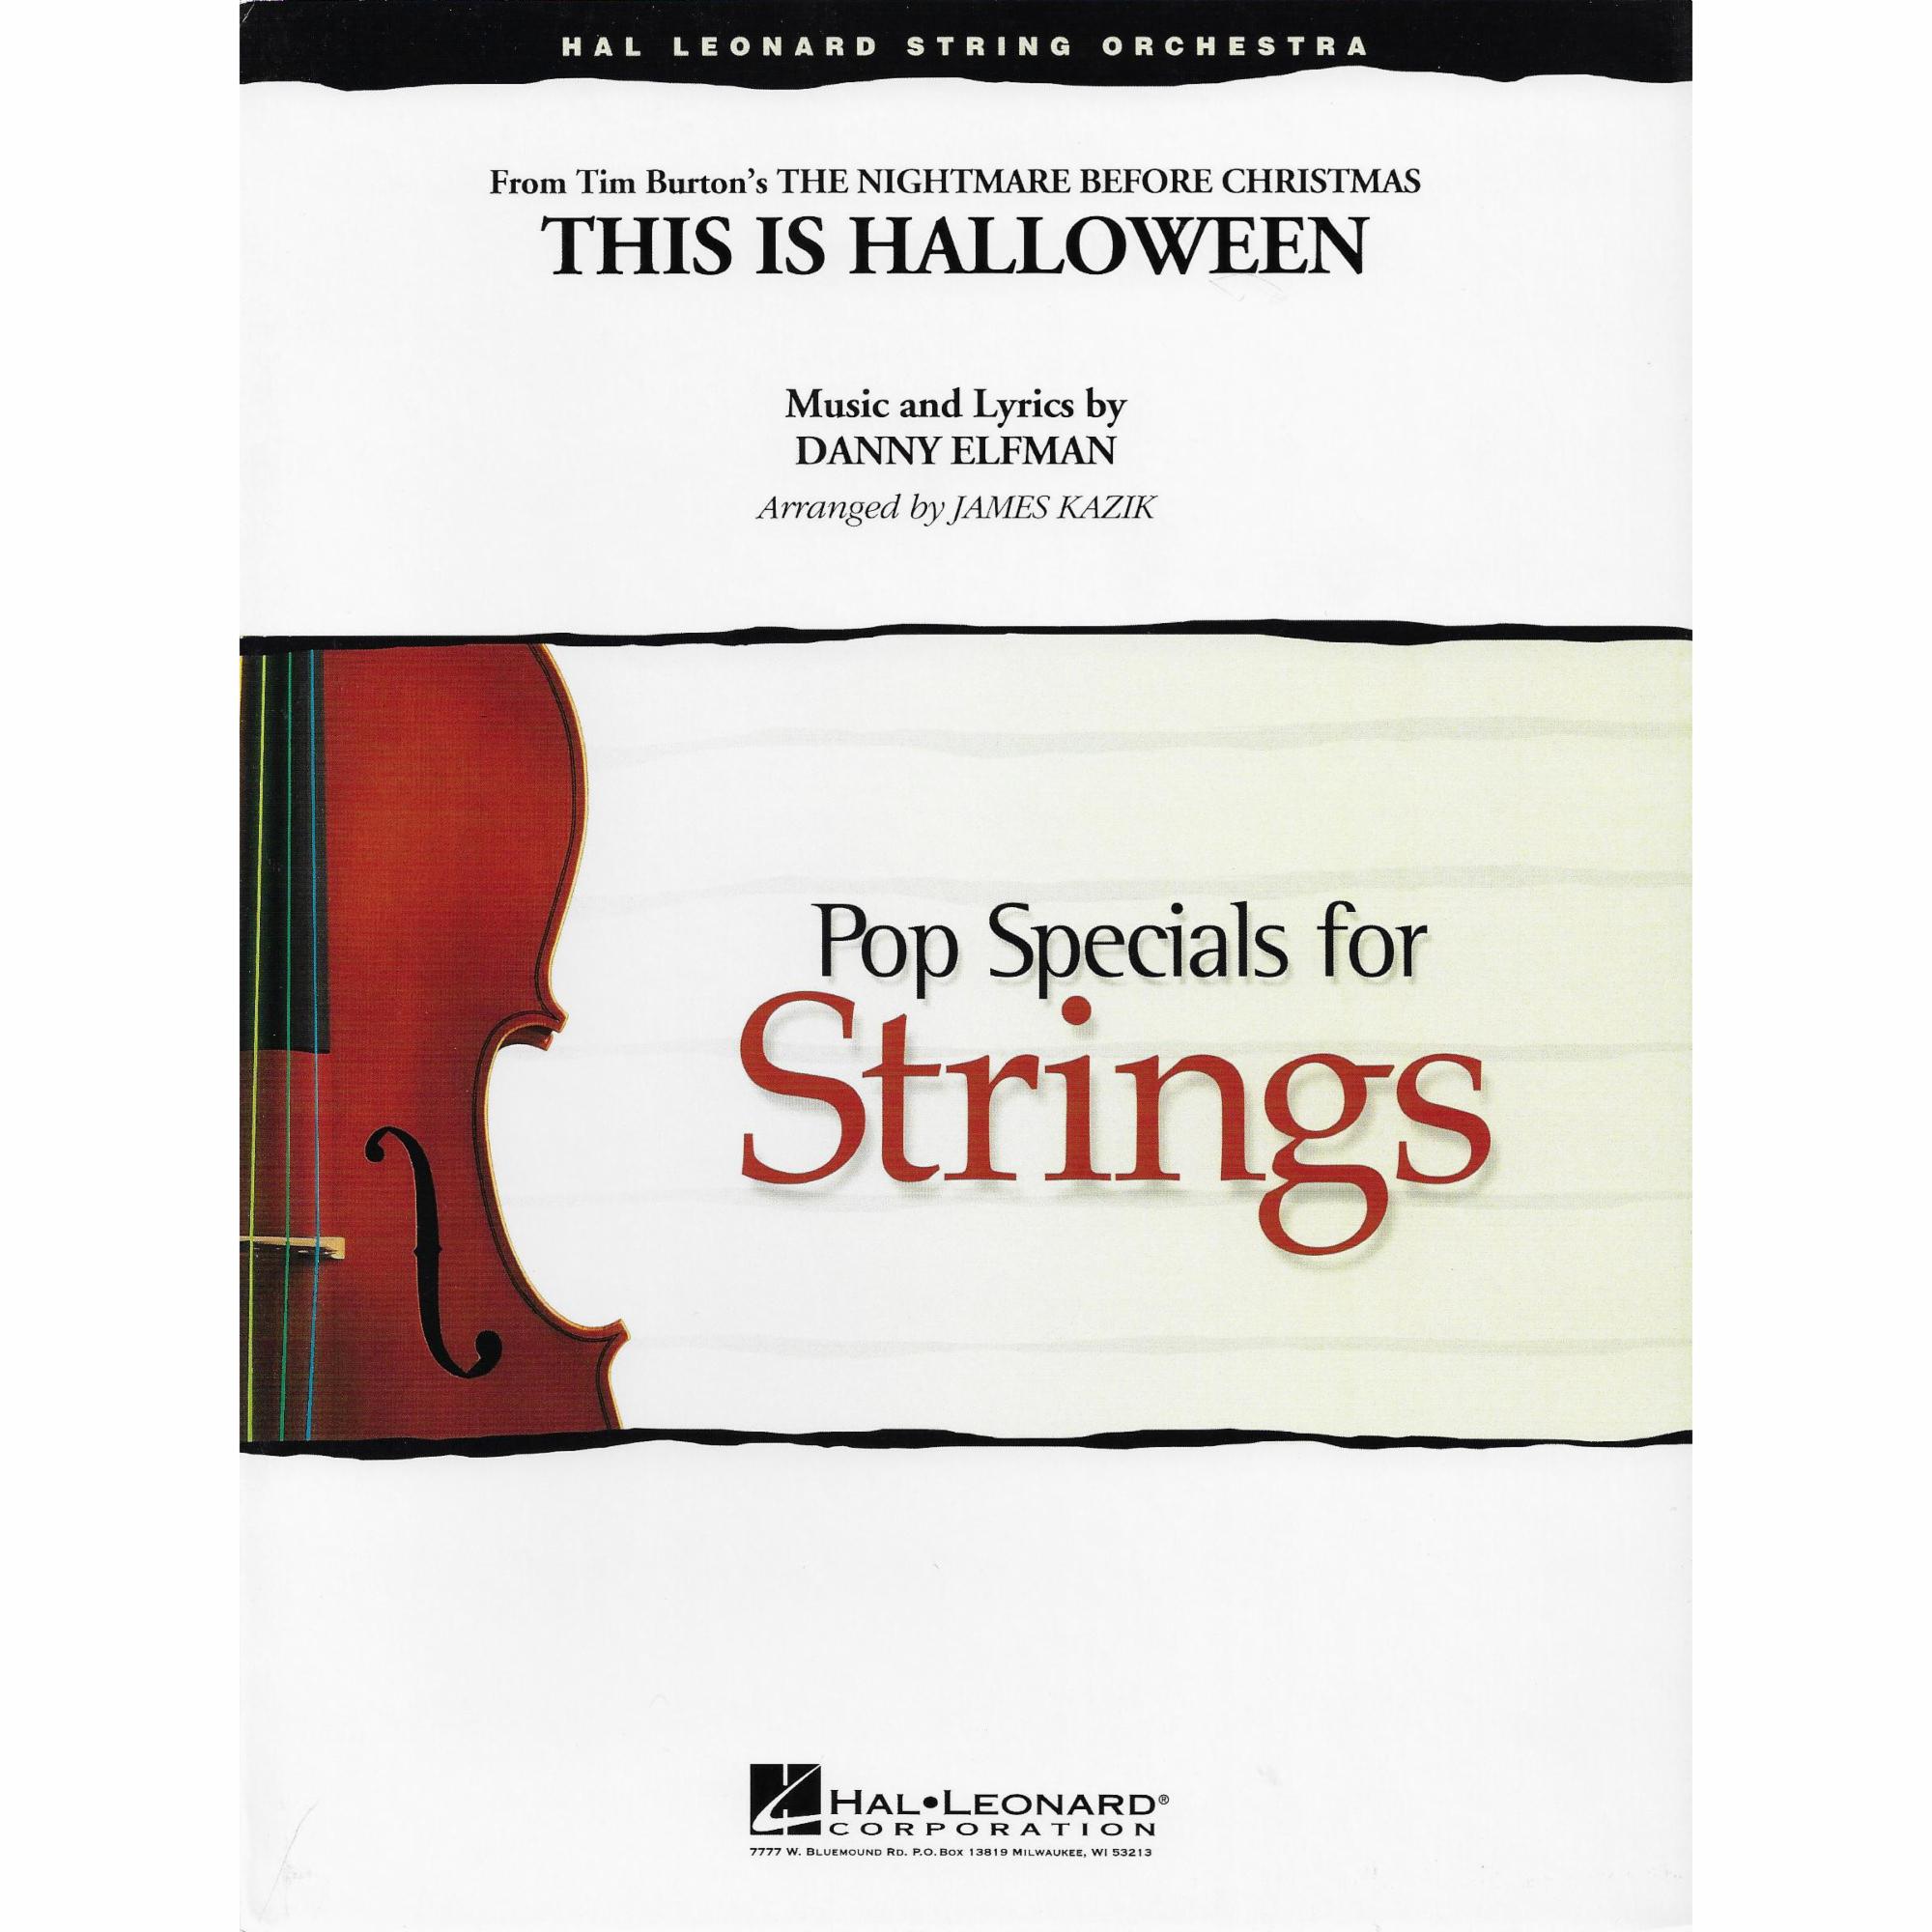 This Is Halloween from The Nightmare Before Christmas for String Orchestra